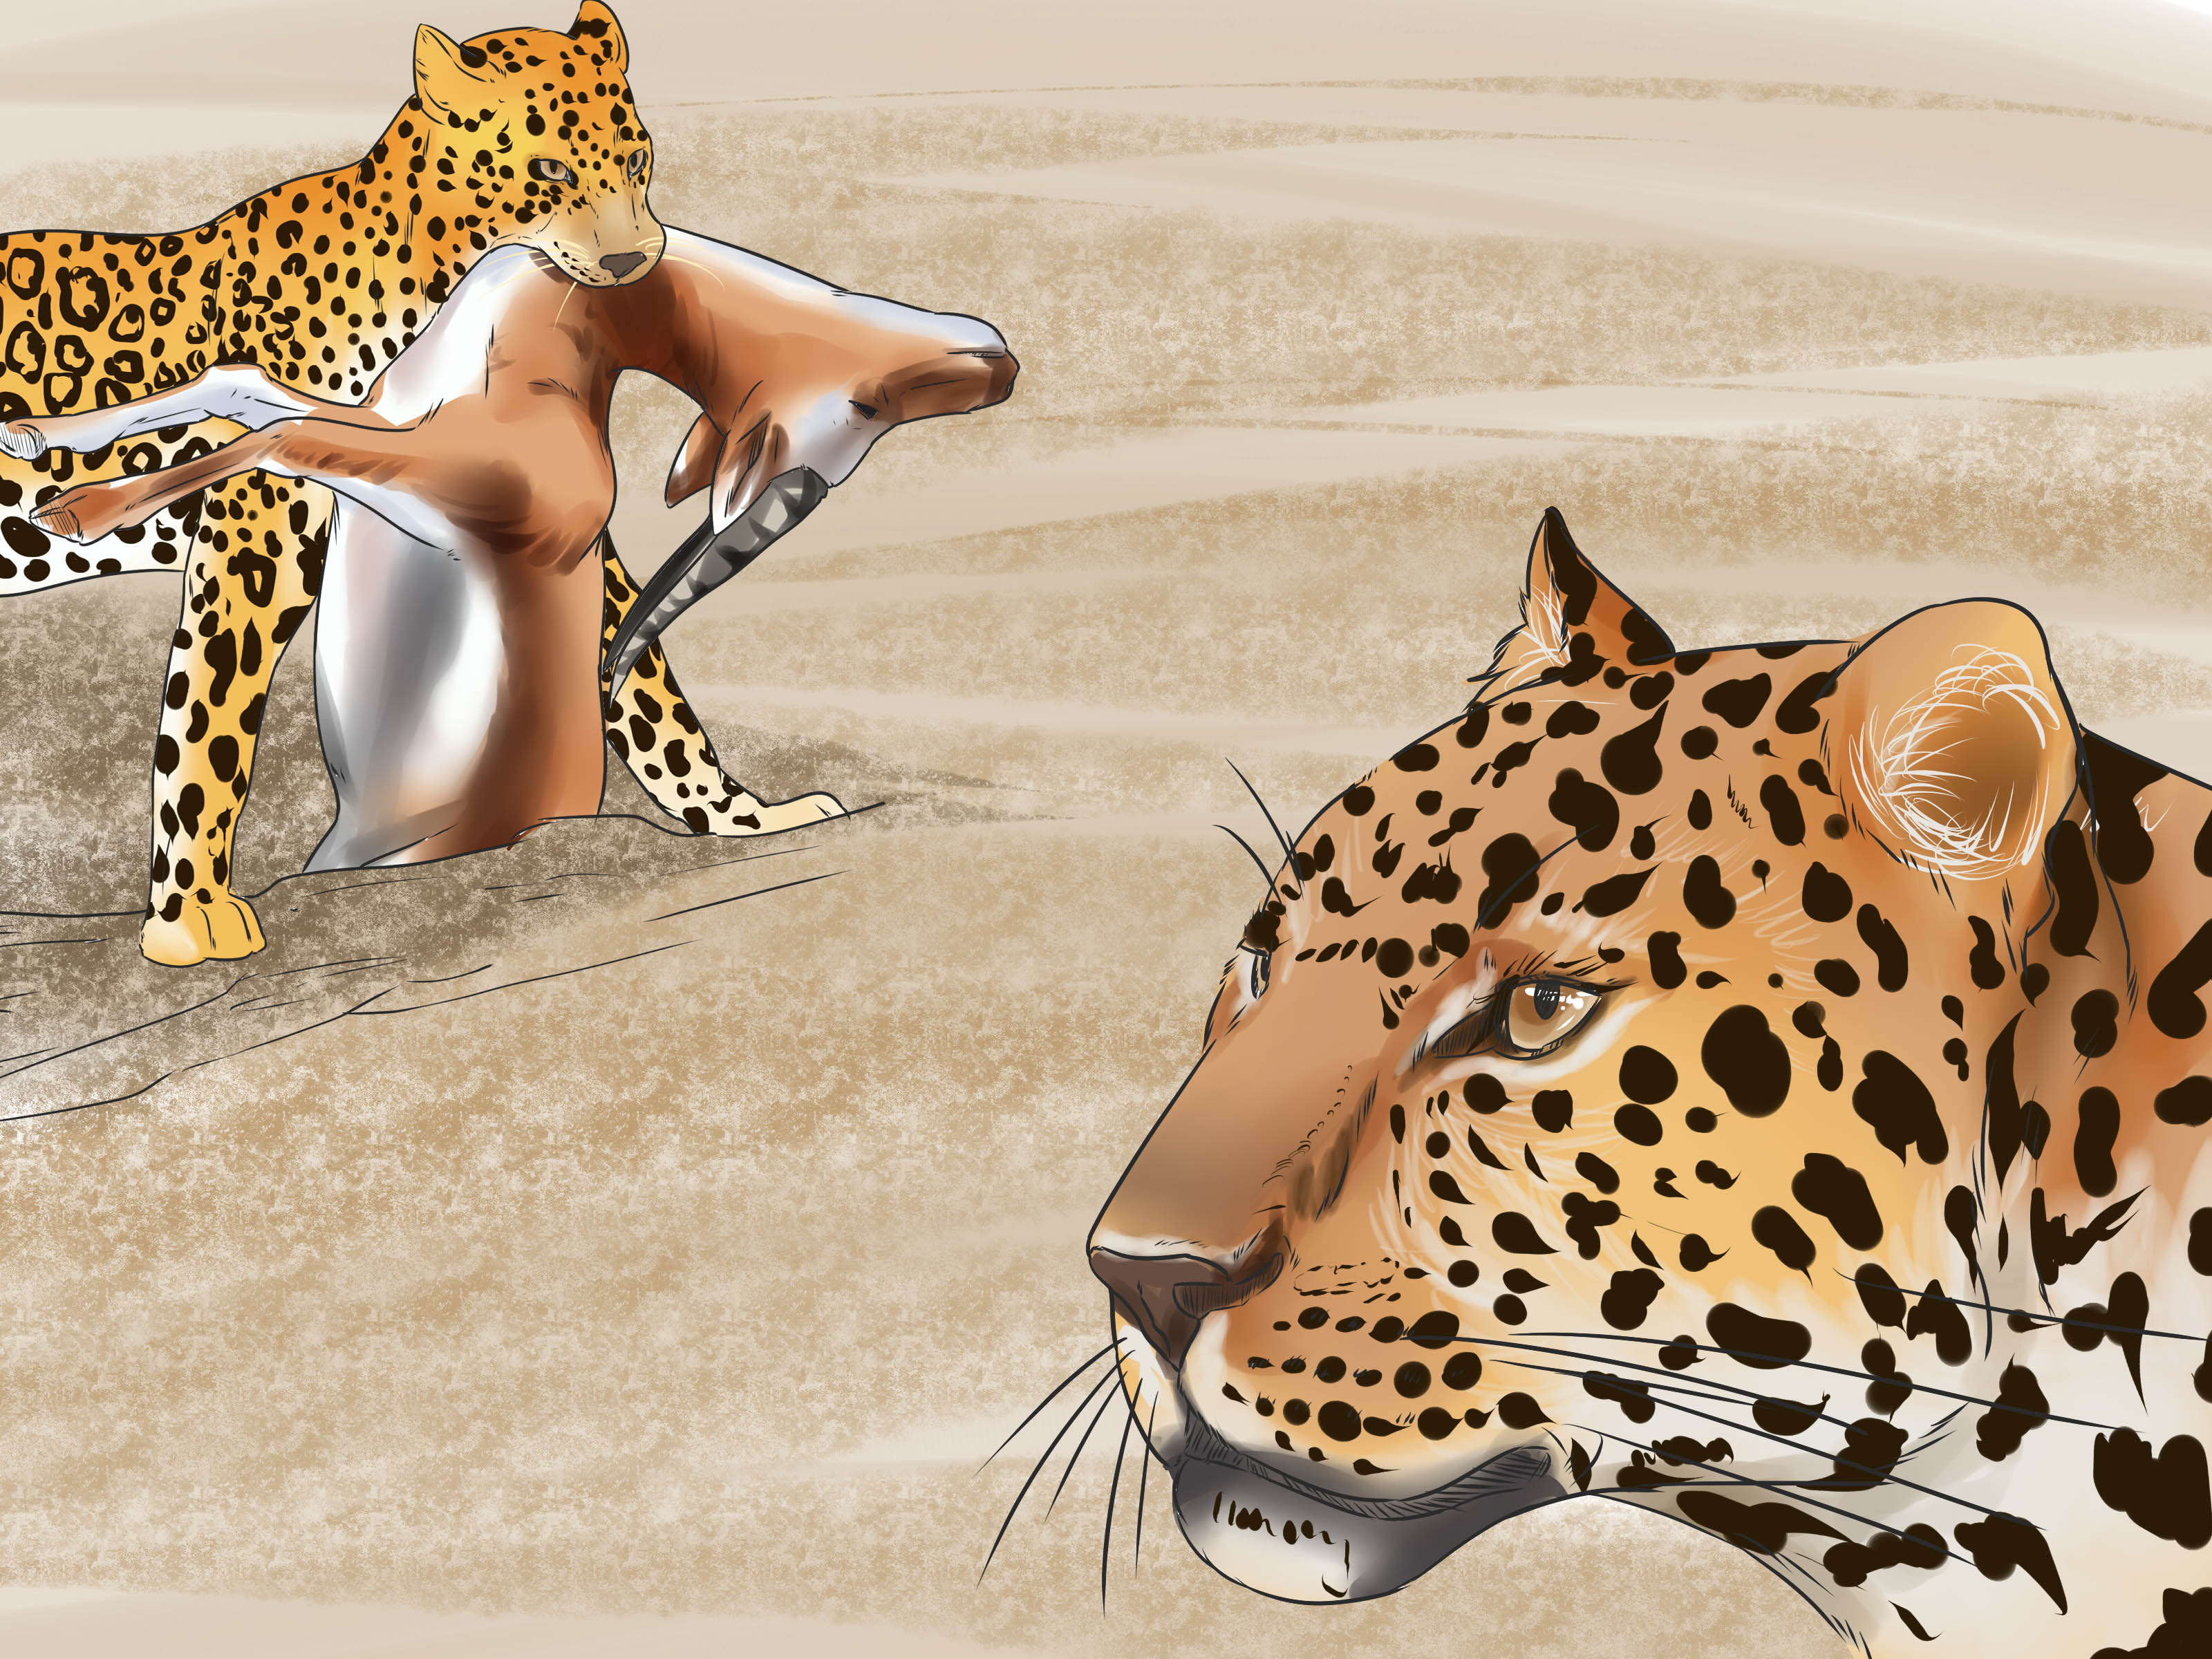 3 Ways to Tell a Jaguar from a Leopard - wikiHow